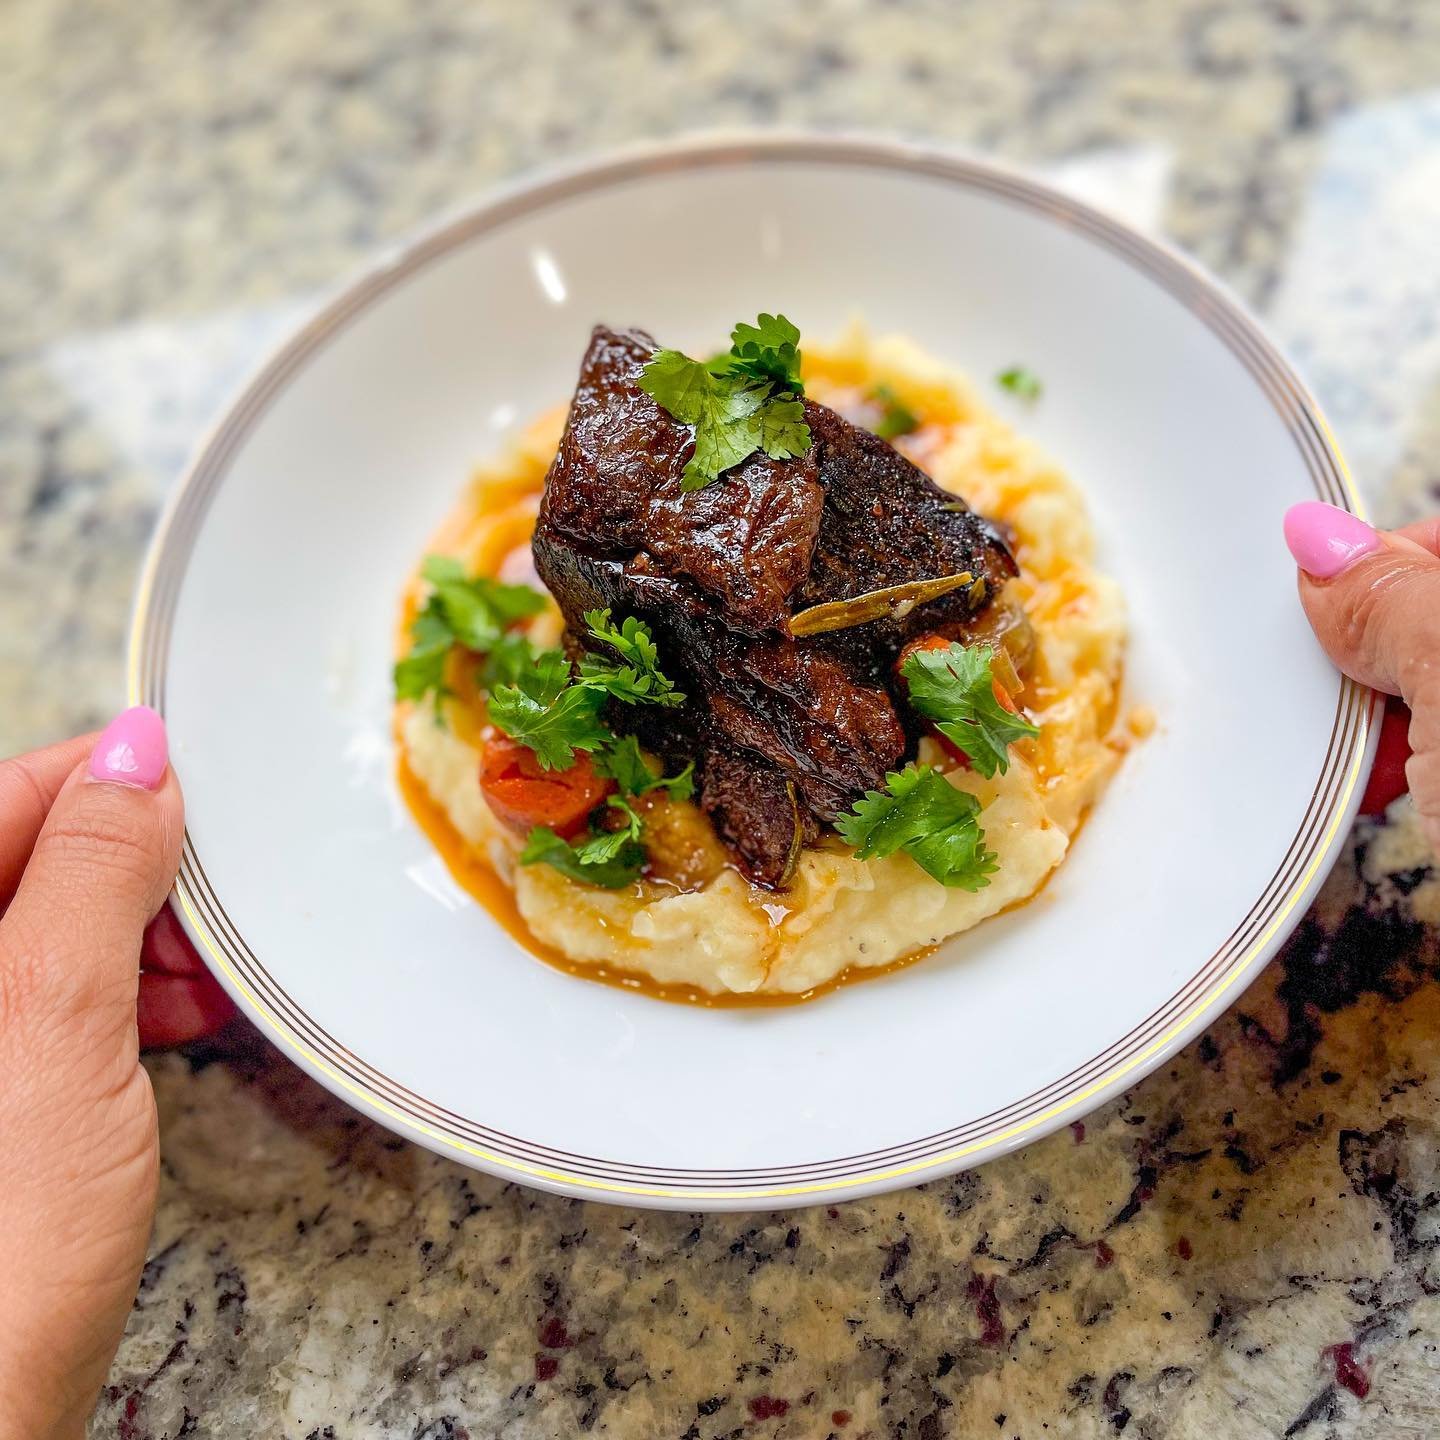 Dinner is served 🍽️ Trying new recipes is one simple way I romanticize my life. 2.5 hours later, these braised short ribs were well worth the wait 😋

💬 Tap In: what&rsquo;s the last really good meal you made? Let me know in the comments, so I can 